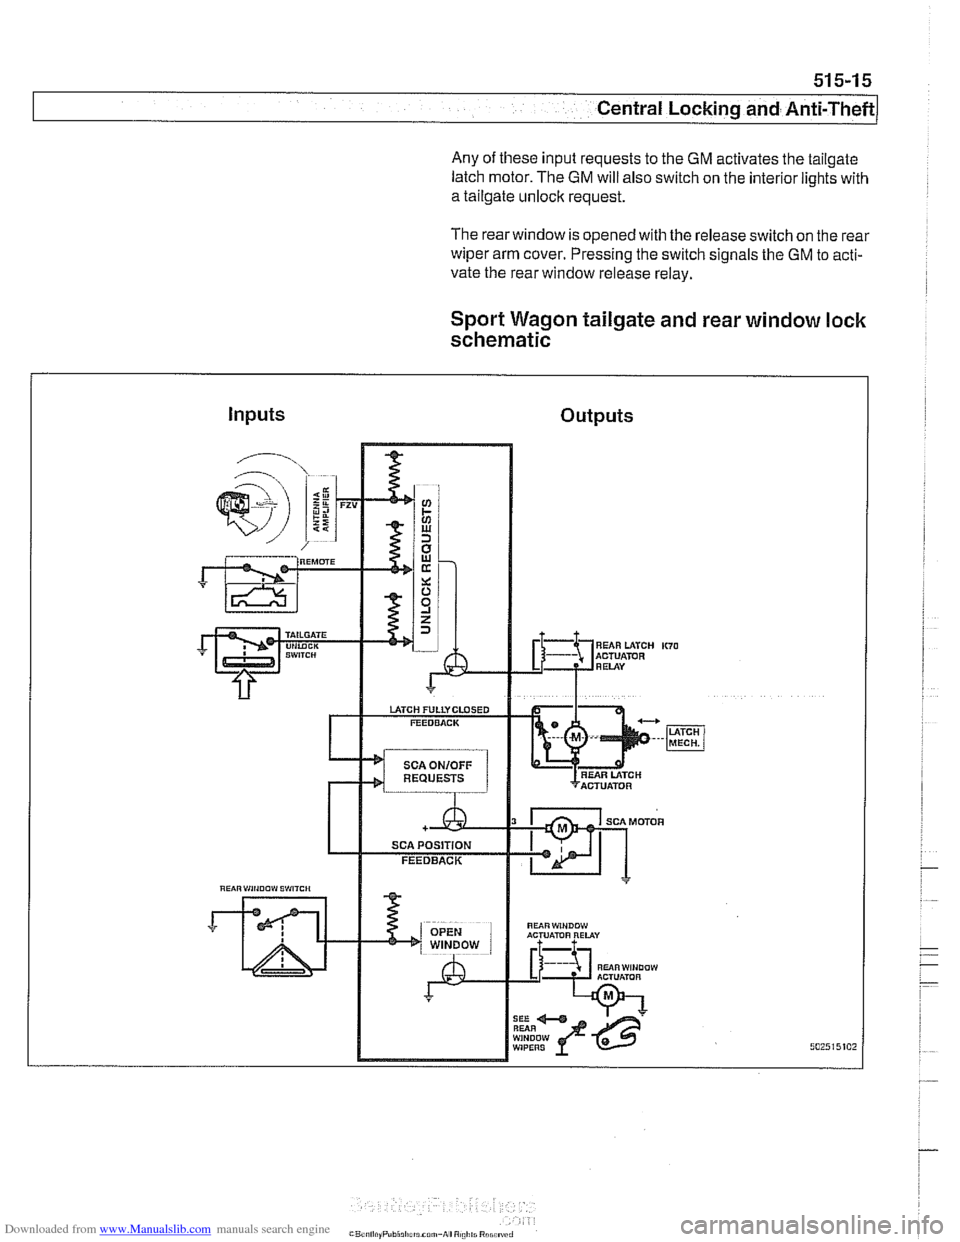 BMW 525i 1998 E39 Workshop Manual Downloaded from www.Manualslib.com manuals search engine 
51 5-1 5 
Central Locking and Anti-Theft 
Any  of these input requests to  the GM activates  the tailgate 
latch motor.  The 
GM will also swi